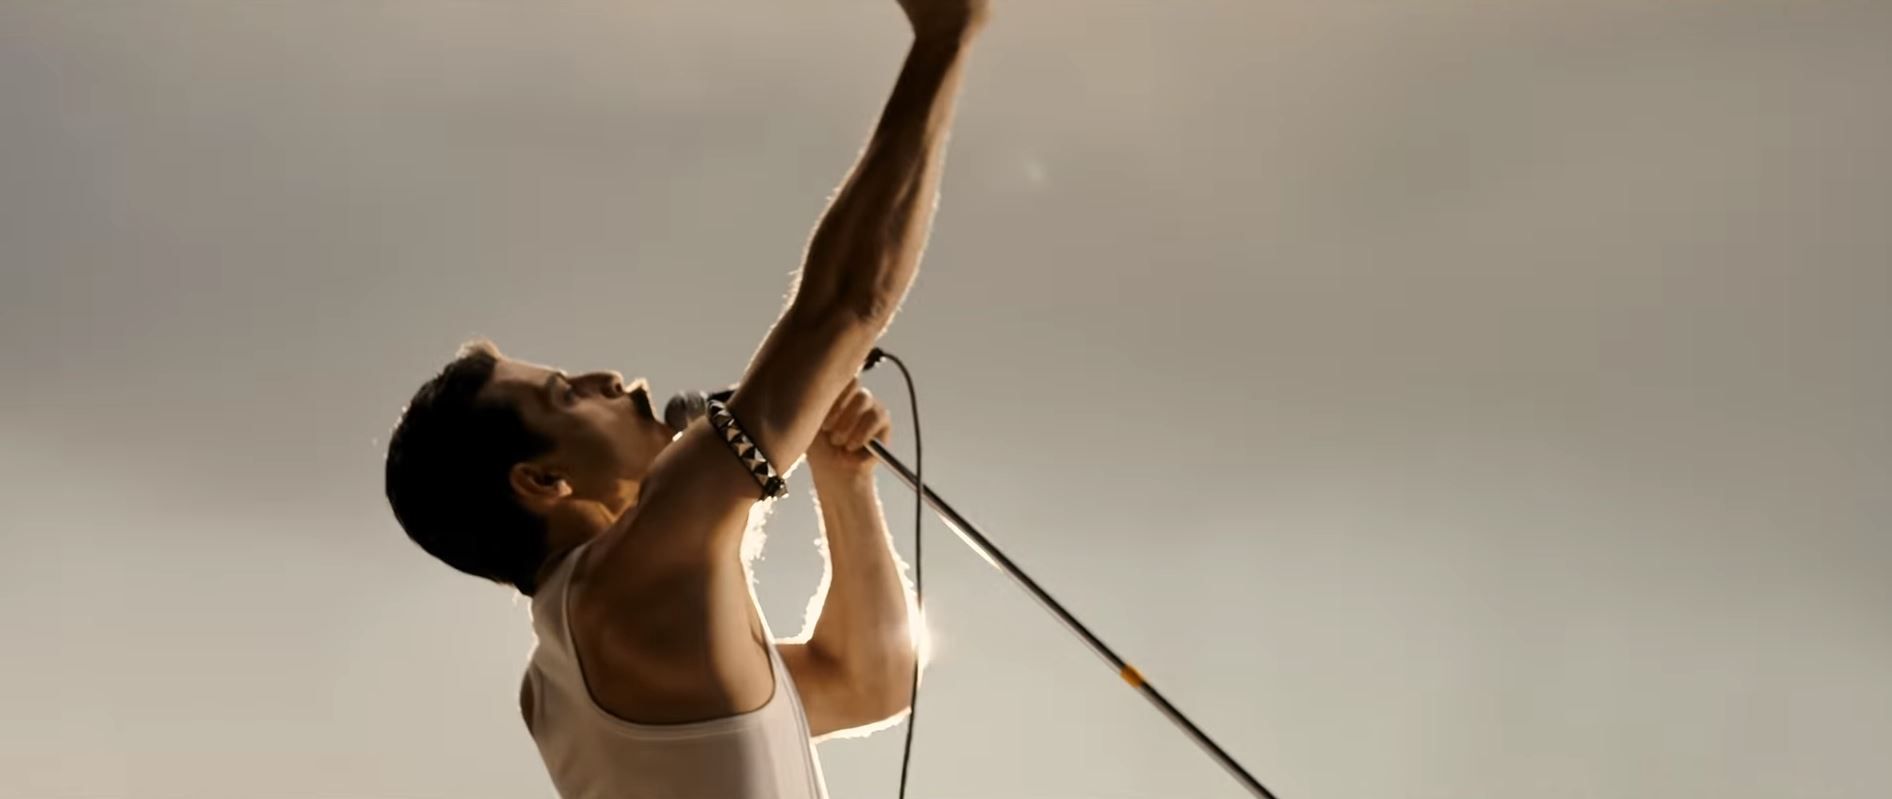 New 'Bohemian Rhapsody' Trailer Tackles Fan Complaints And We're More Excited Than Ever